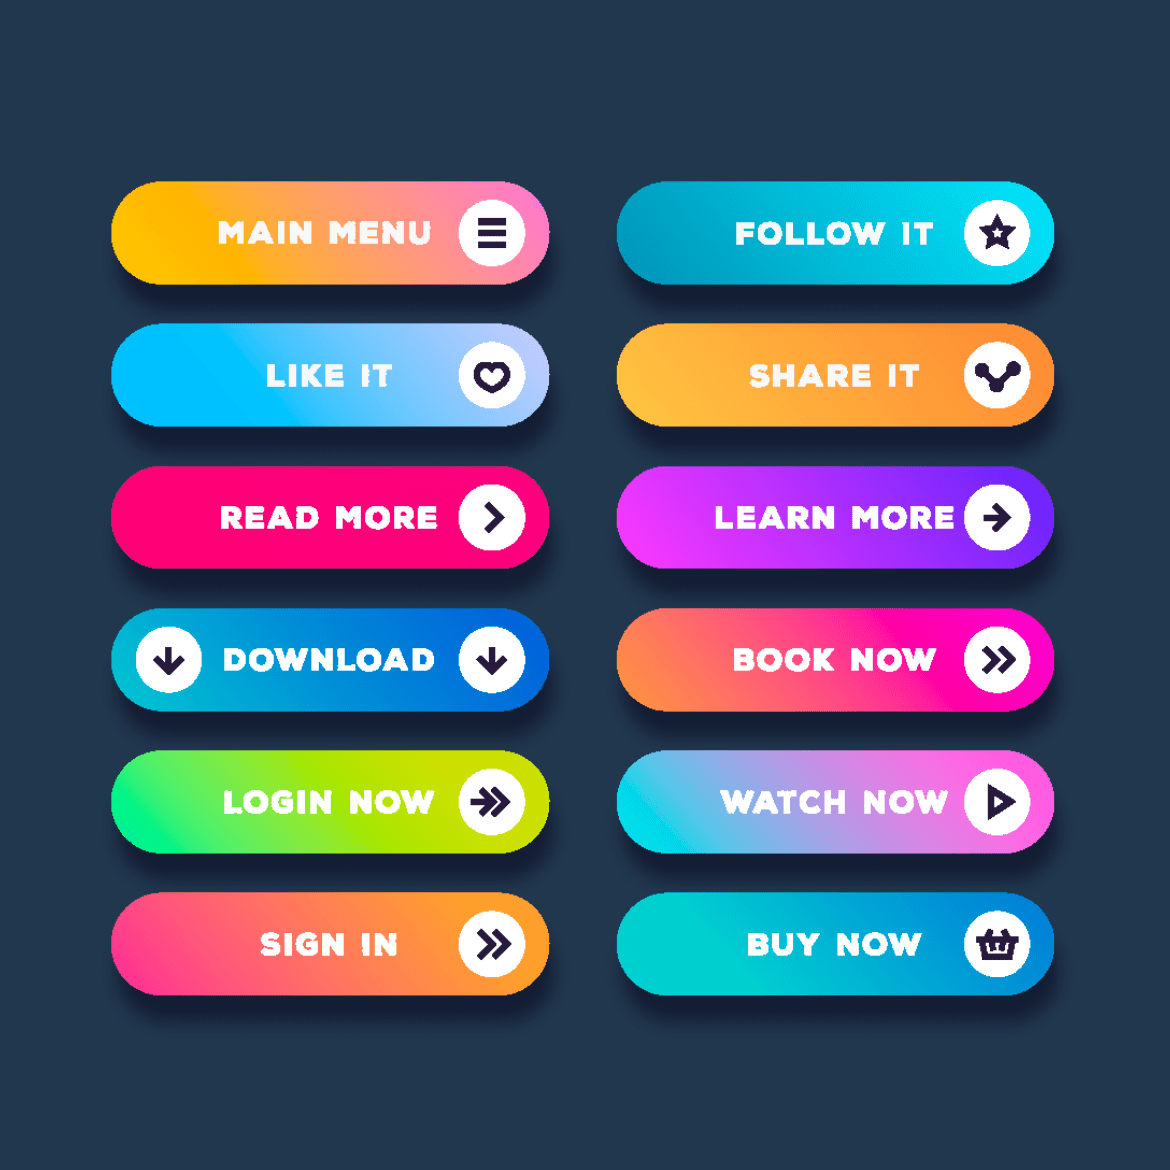 Call-to-action buttons - what are they, and how do they work? - PUSH.fm